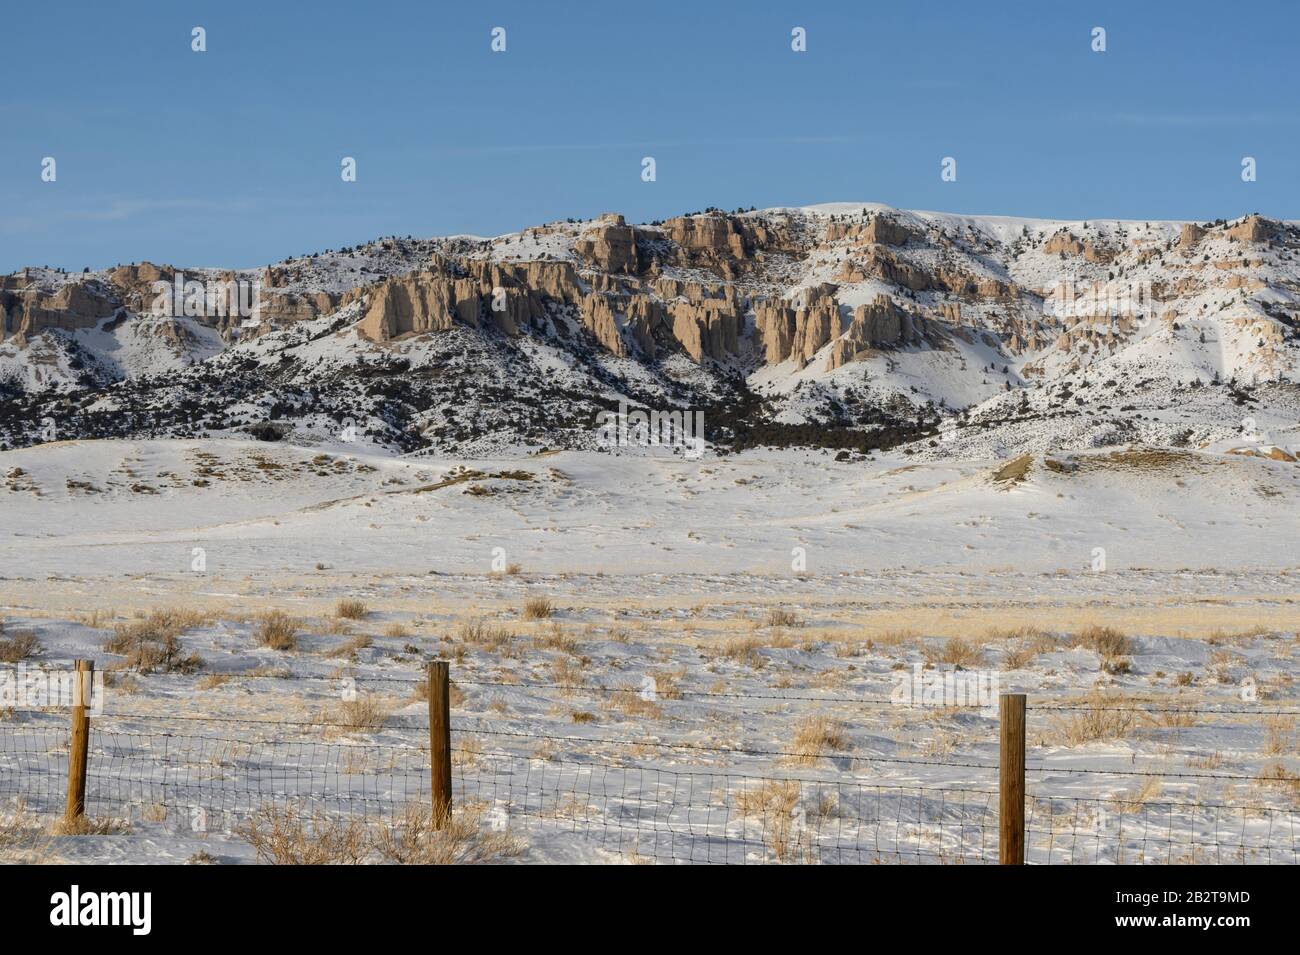 Wyoming landscape scene of a snowy hillside and rock outcropping in a rural area. Stock Photo